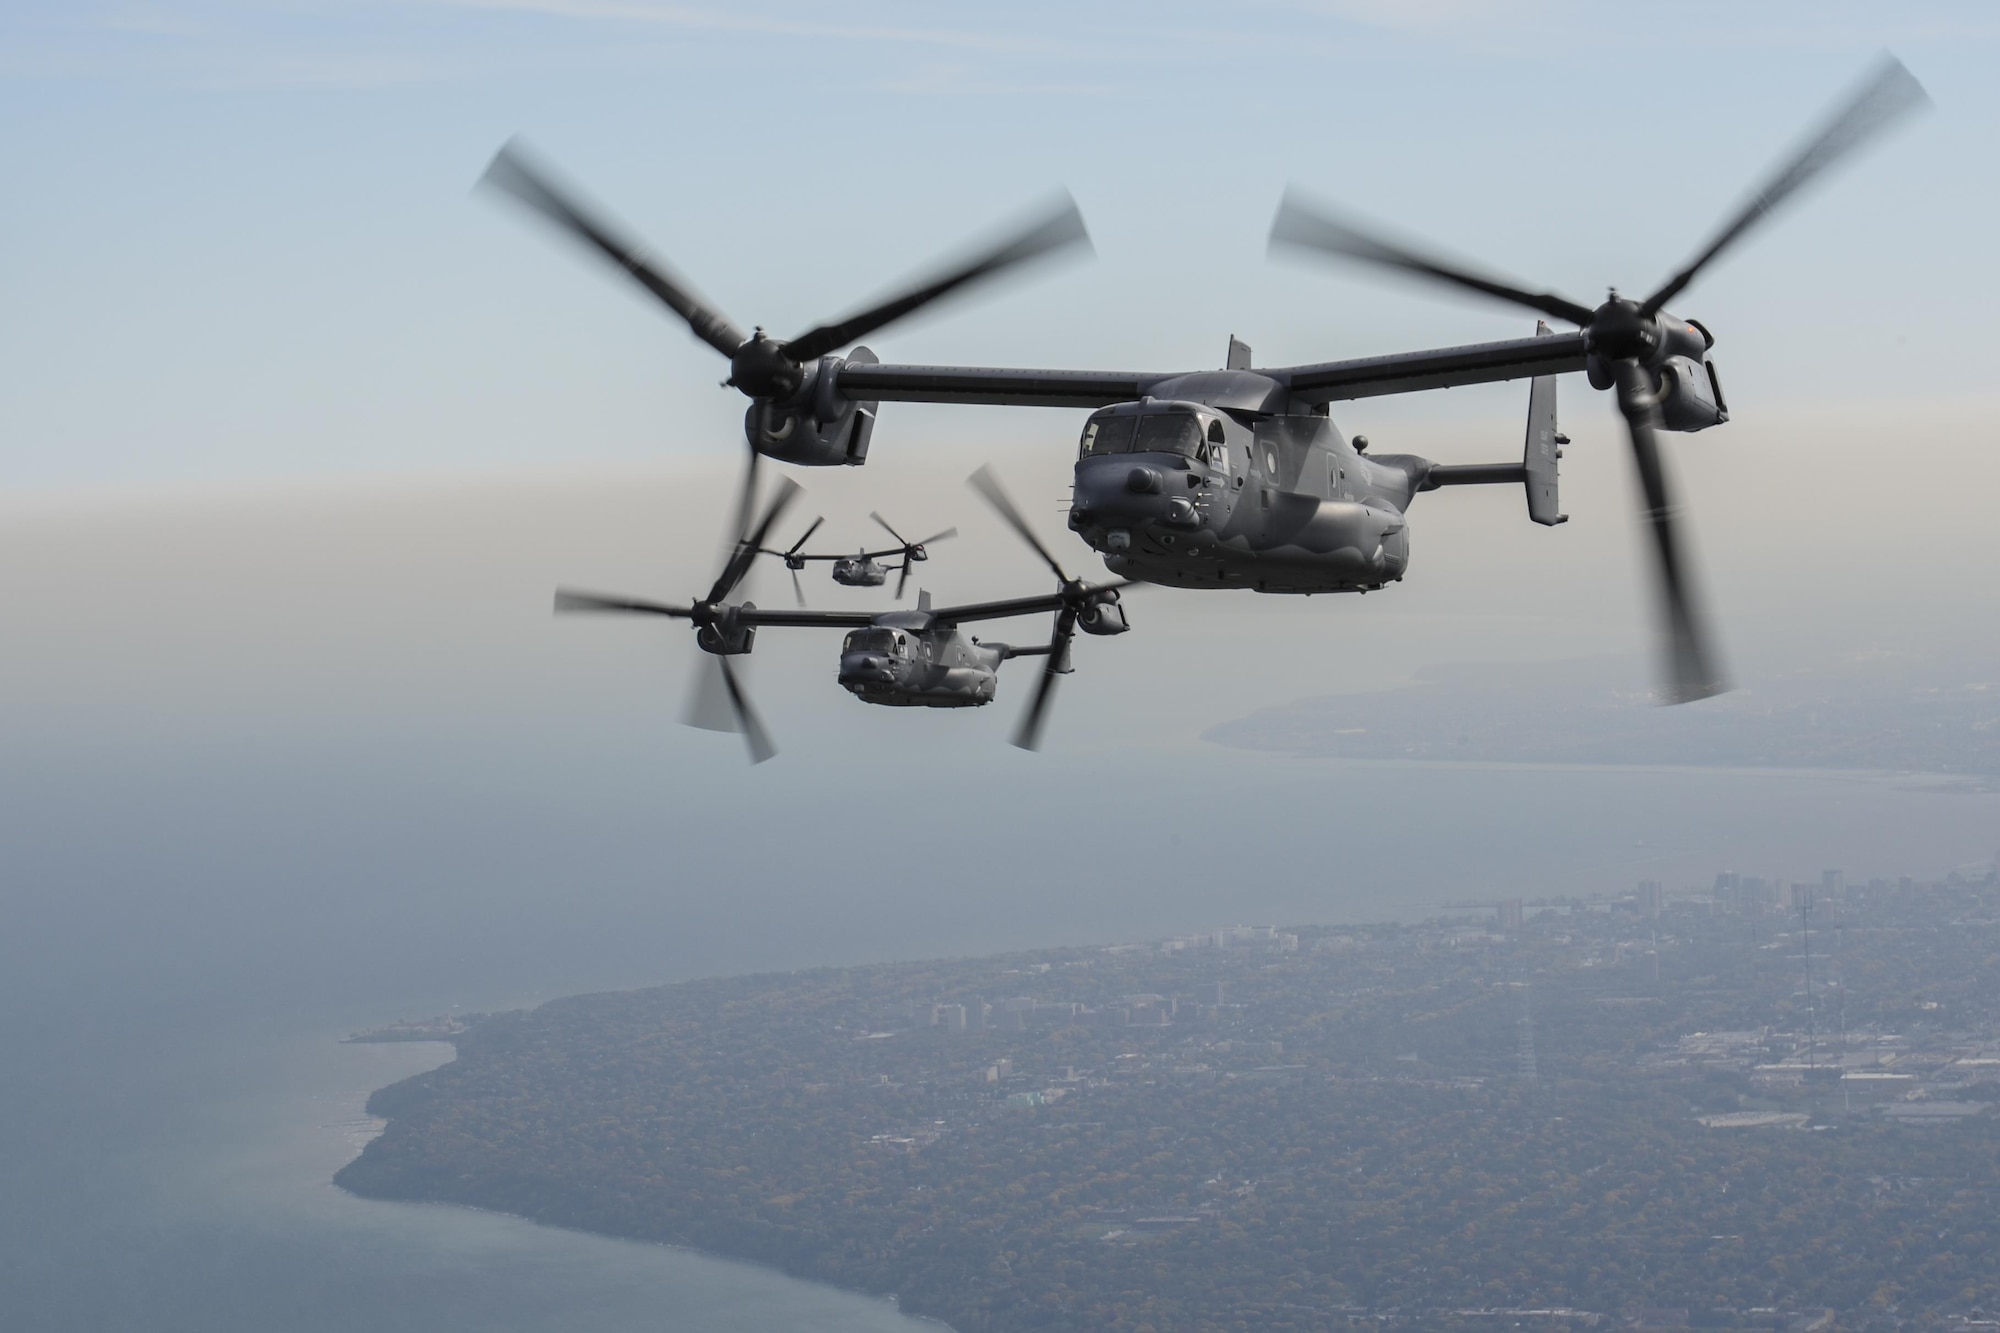 Four CV-22 Osprey aircraft with the 8th Special Operations Squadron from Hurlburt Field, Fla., fly along the Lake Michigan coast, Oct. 14, 2016. The 8th SOS visited the Milwaukee-Green Bay area for a flyover above Lambeau Field Oct. 16 during the Green Bay versus Dallas NFL game. The Osprey is a tiltrotor aircraft that combines the vertical takeoff, hover and vertical landing qualities of a helicopter with the long-range, fuel efficiency and speed characteristics of a turboprop aircraft. (U.S. Air Force photo by Airman 1st Class Joseph Pick)